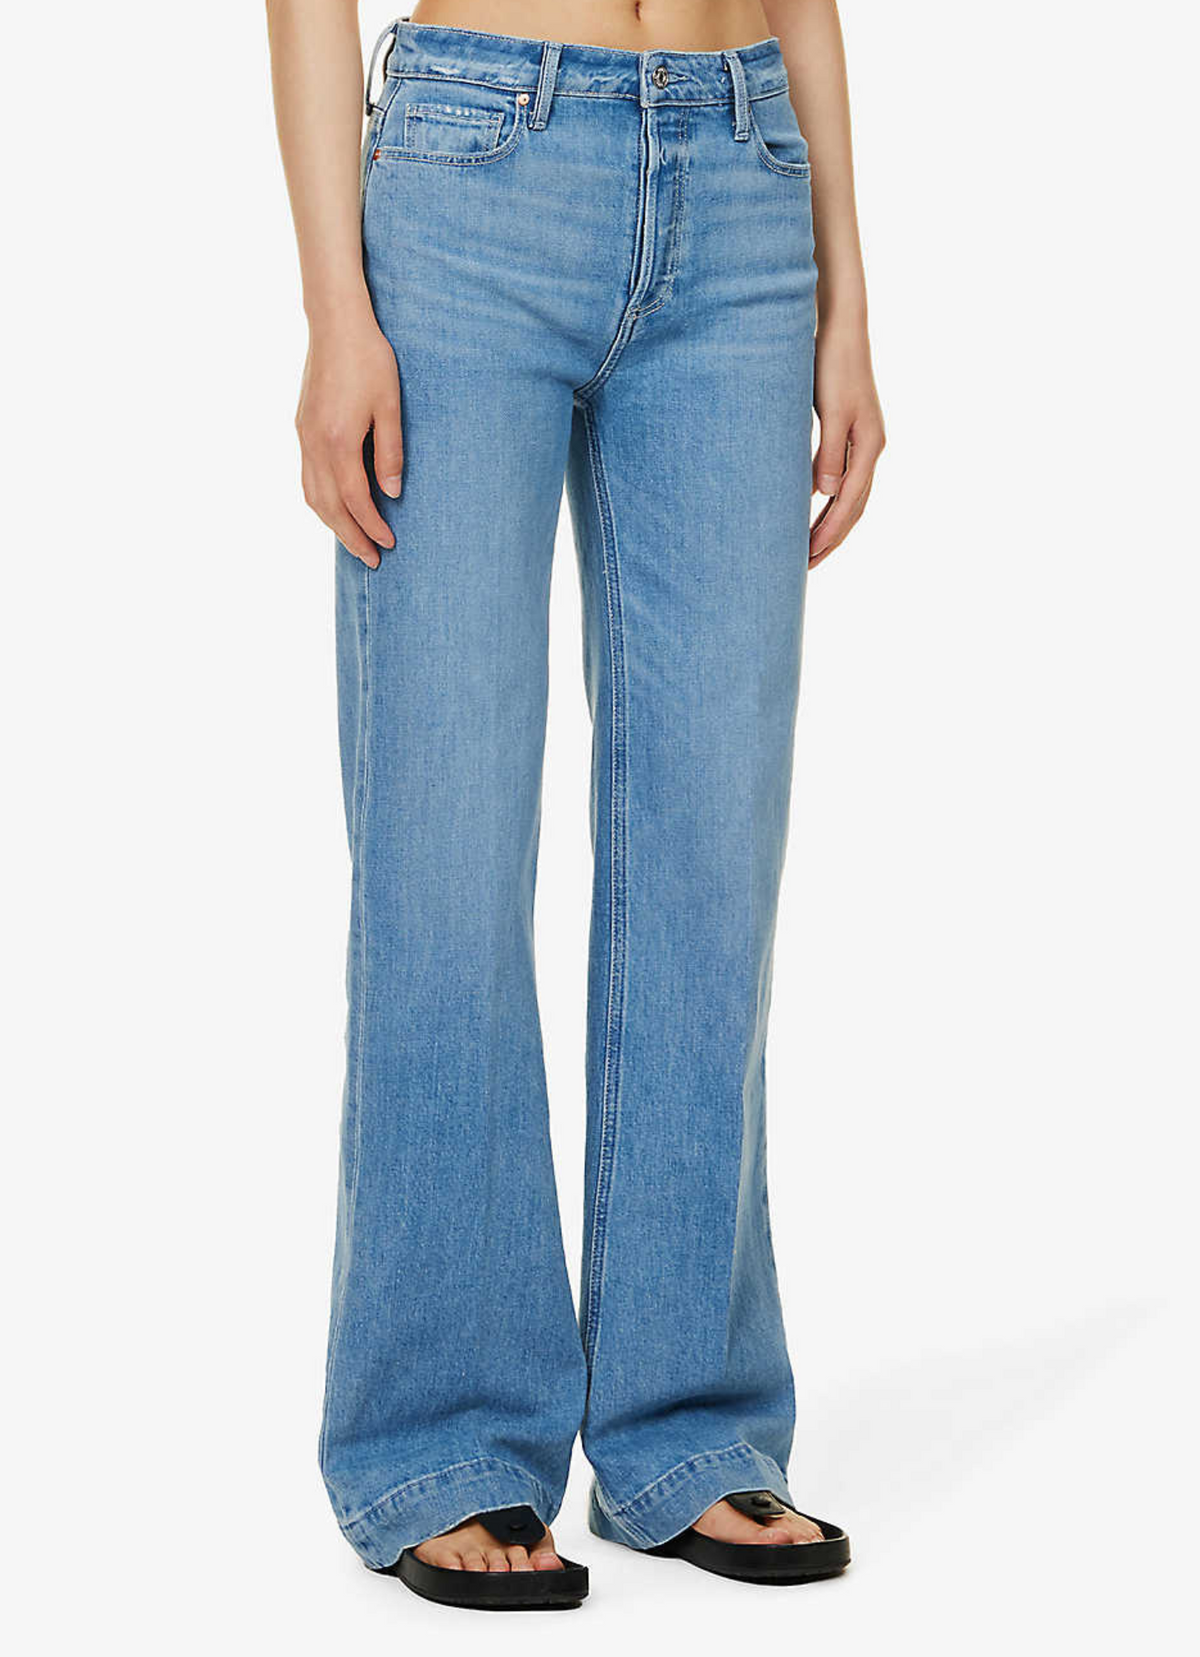 Wide leg light wash jeans with button fly